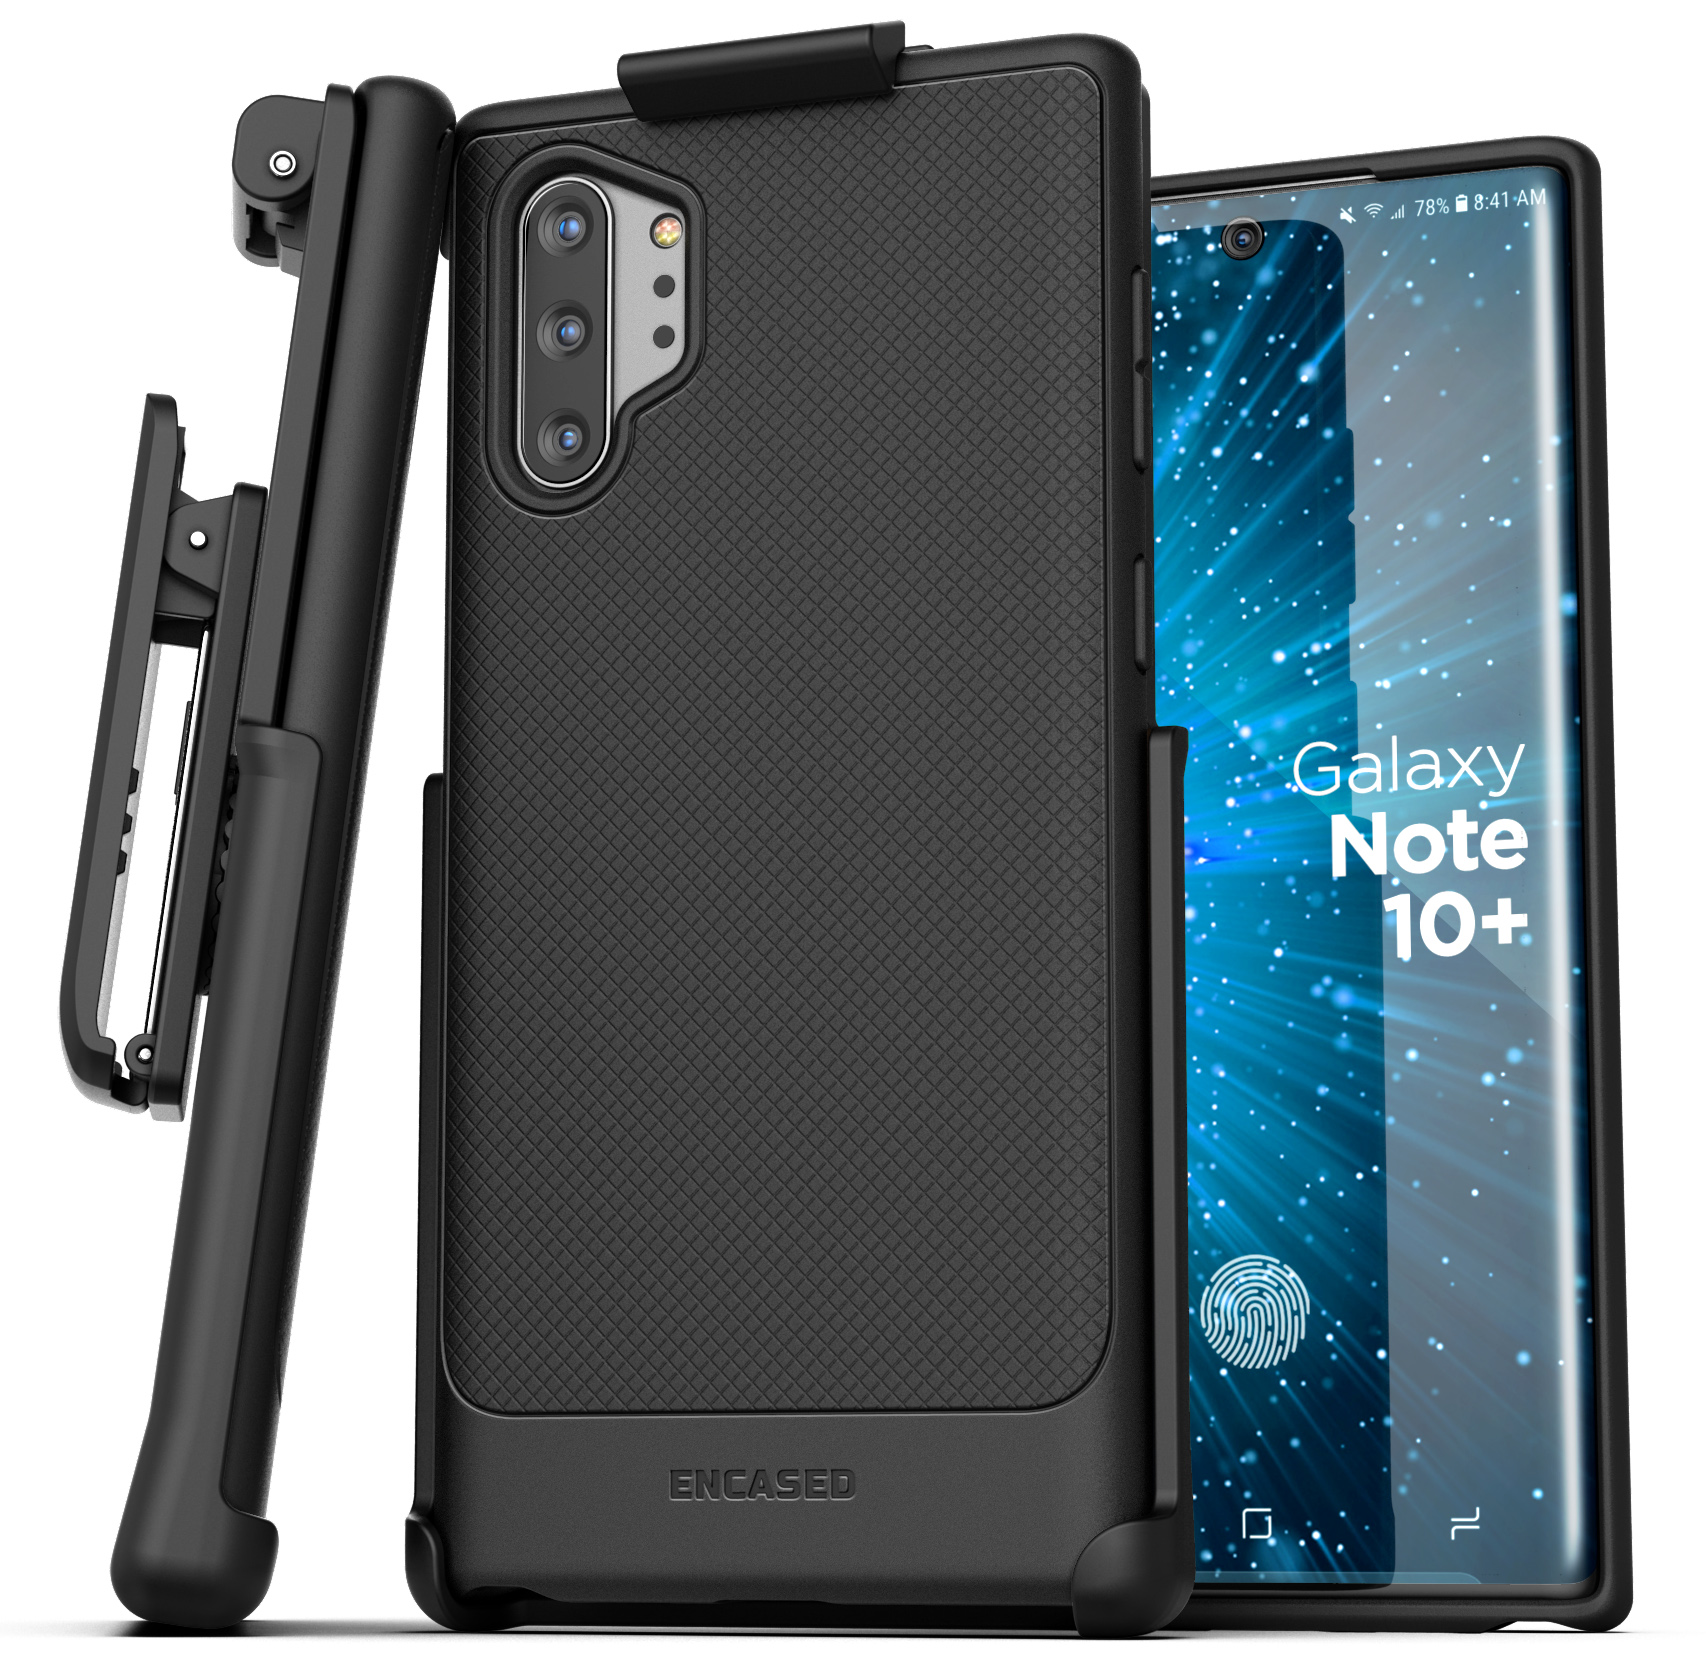 Galaxy Note 10 Plus Thin Armor Black Case with Holster Encased